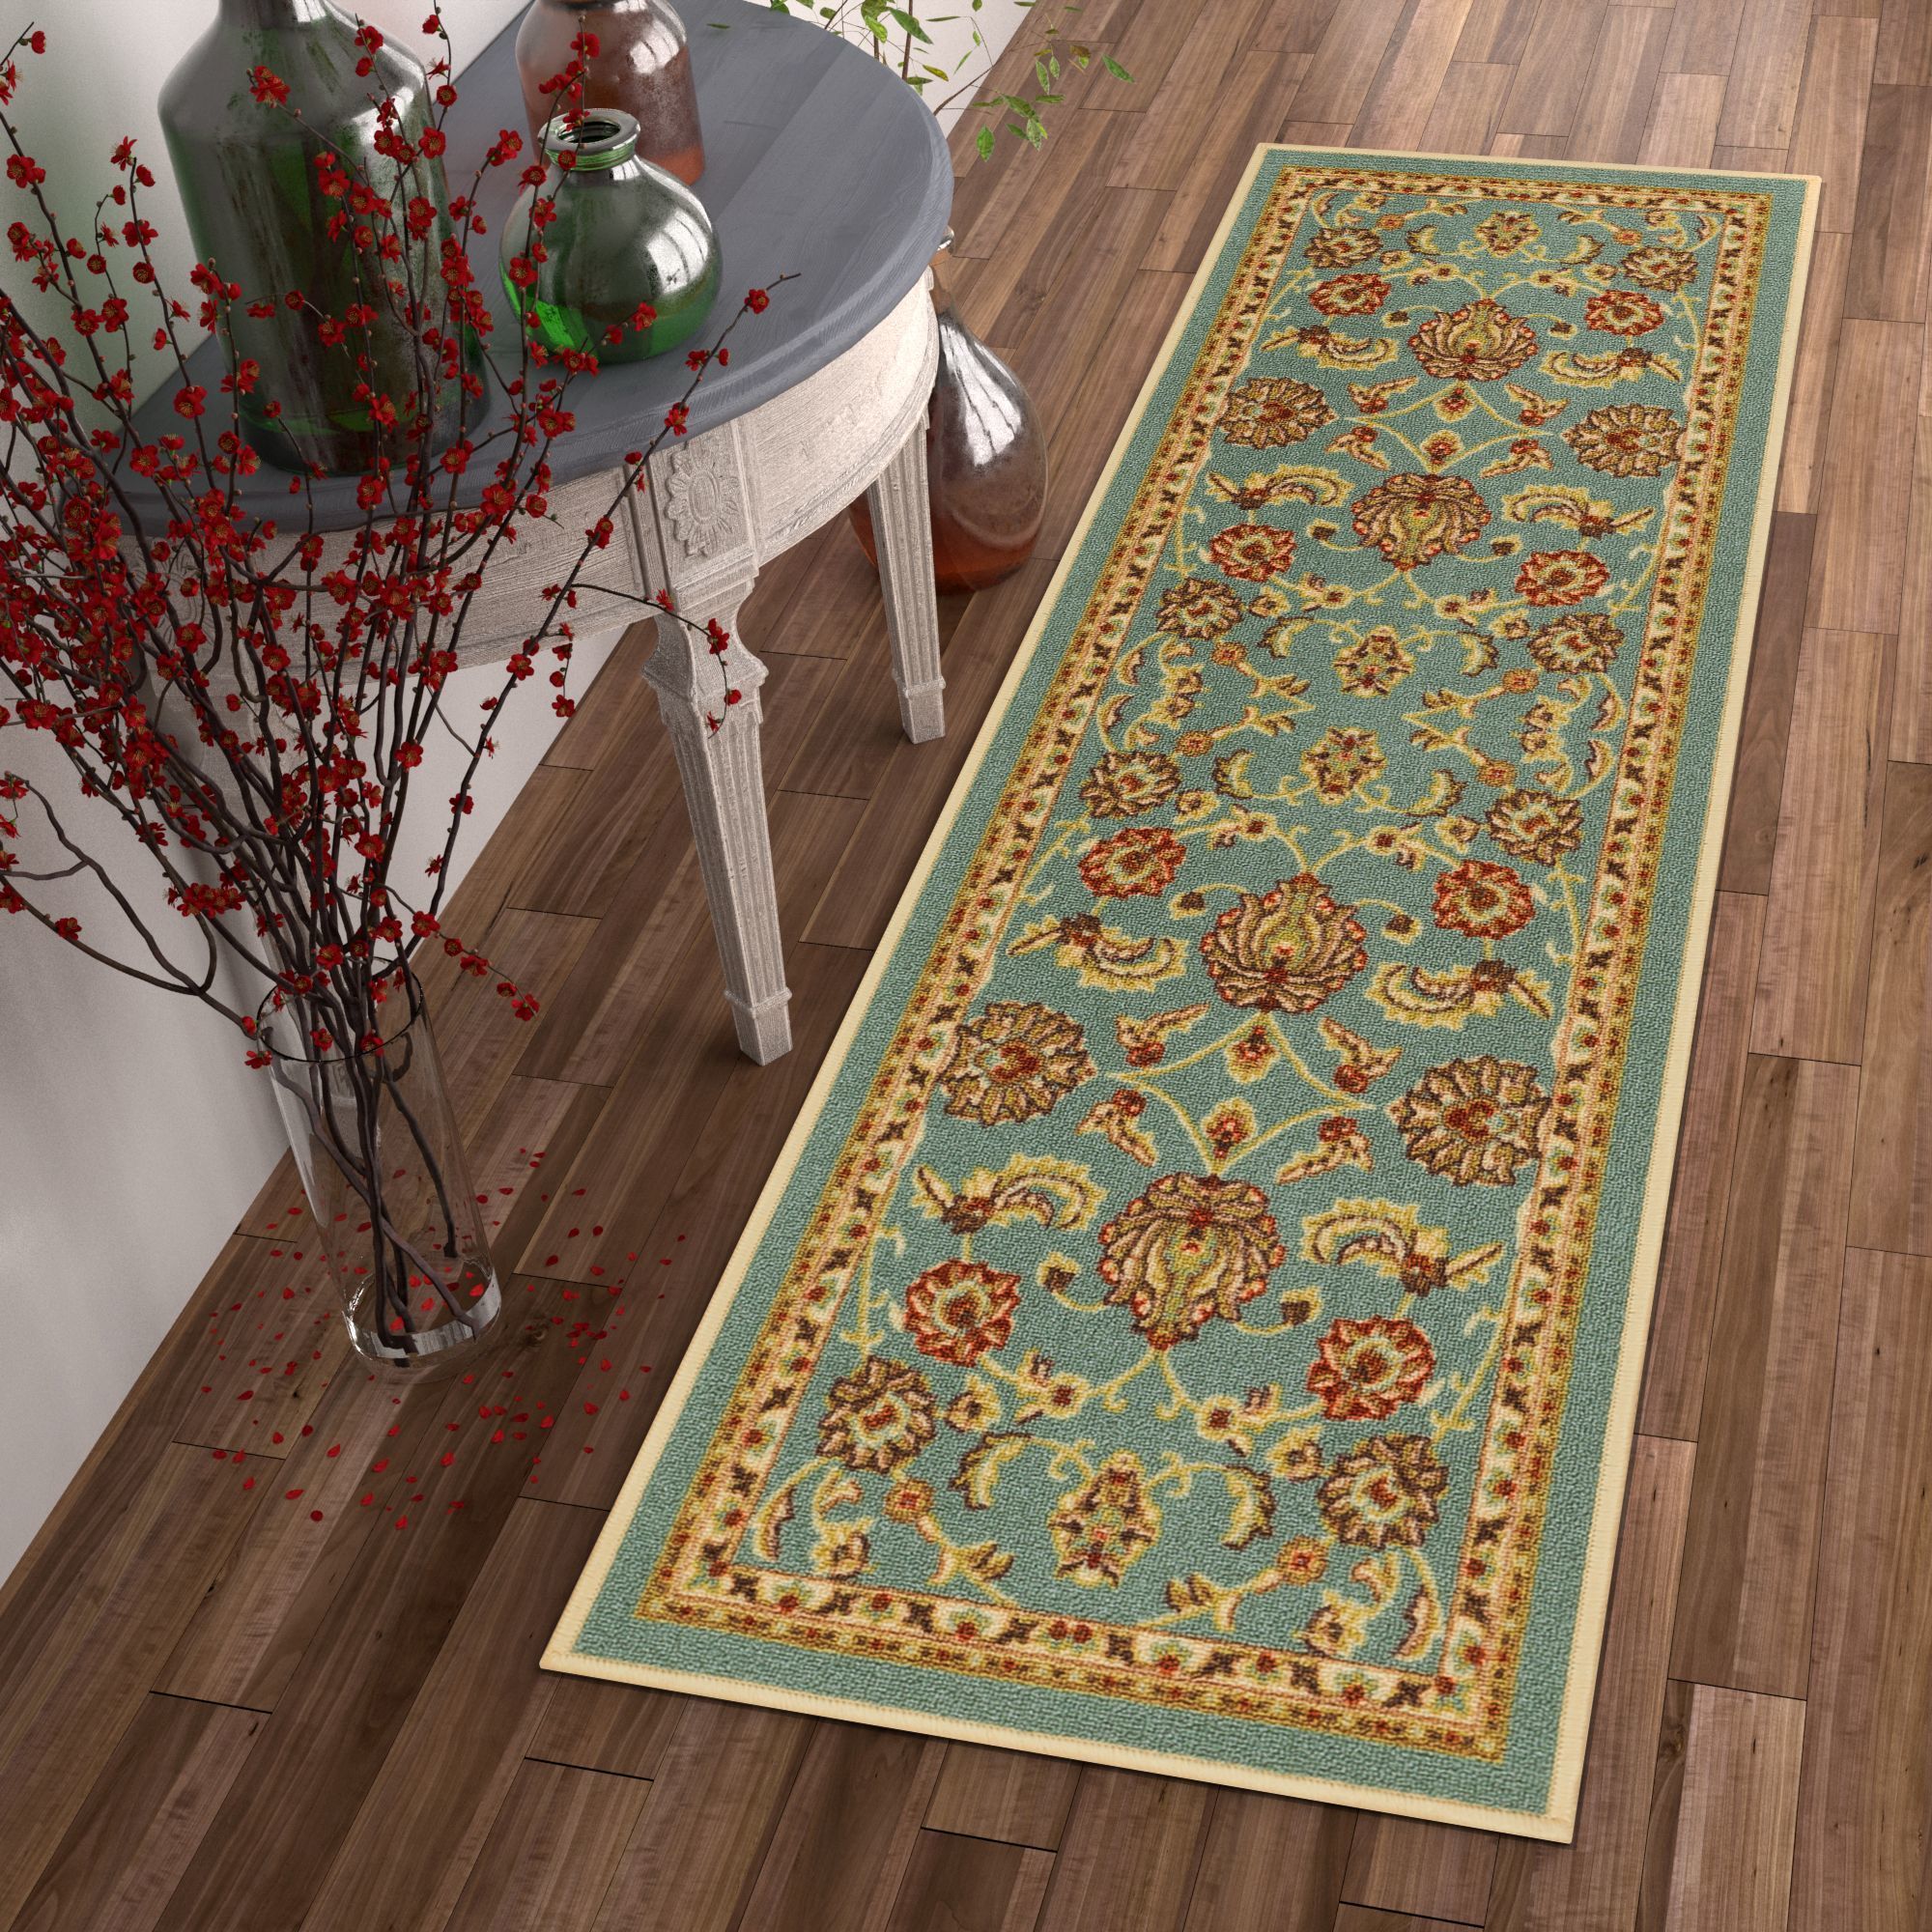 Shop Well Woven Traditional Sarouk Non Skid Backing Runner Rug 2